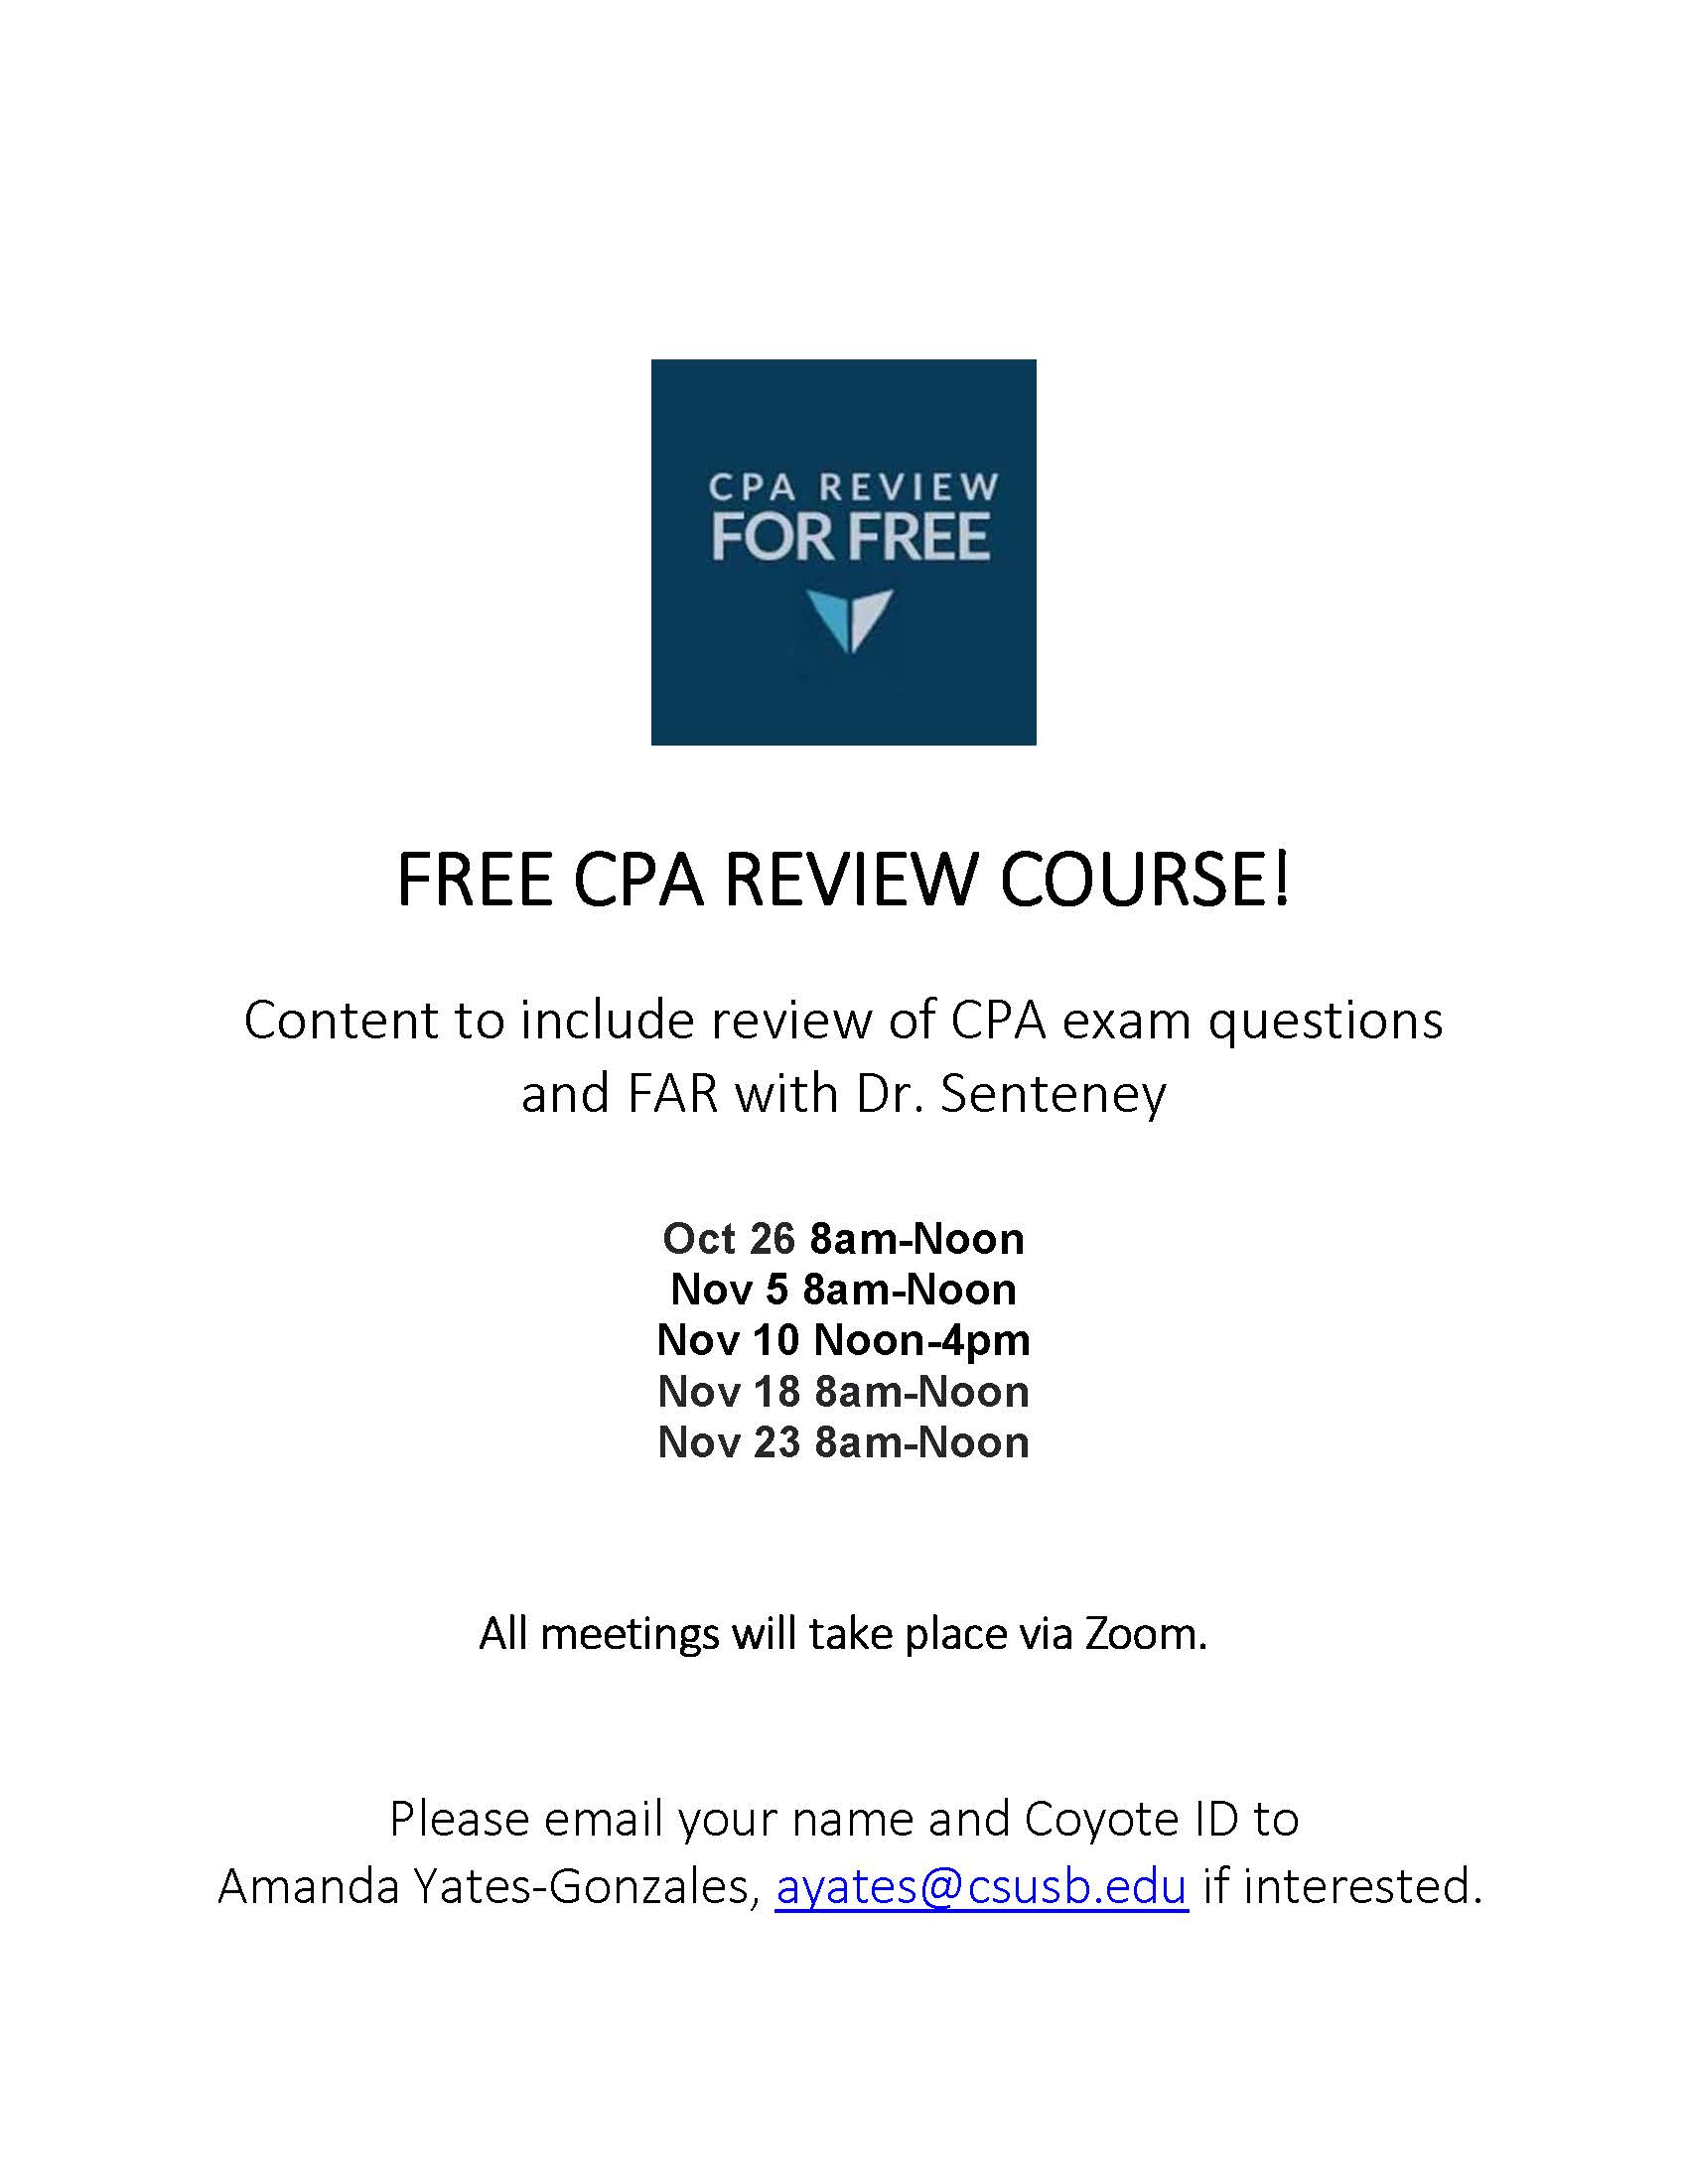 Free CPA Review Course Starts Oct 26